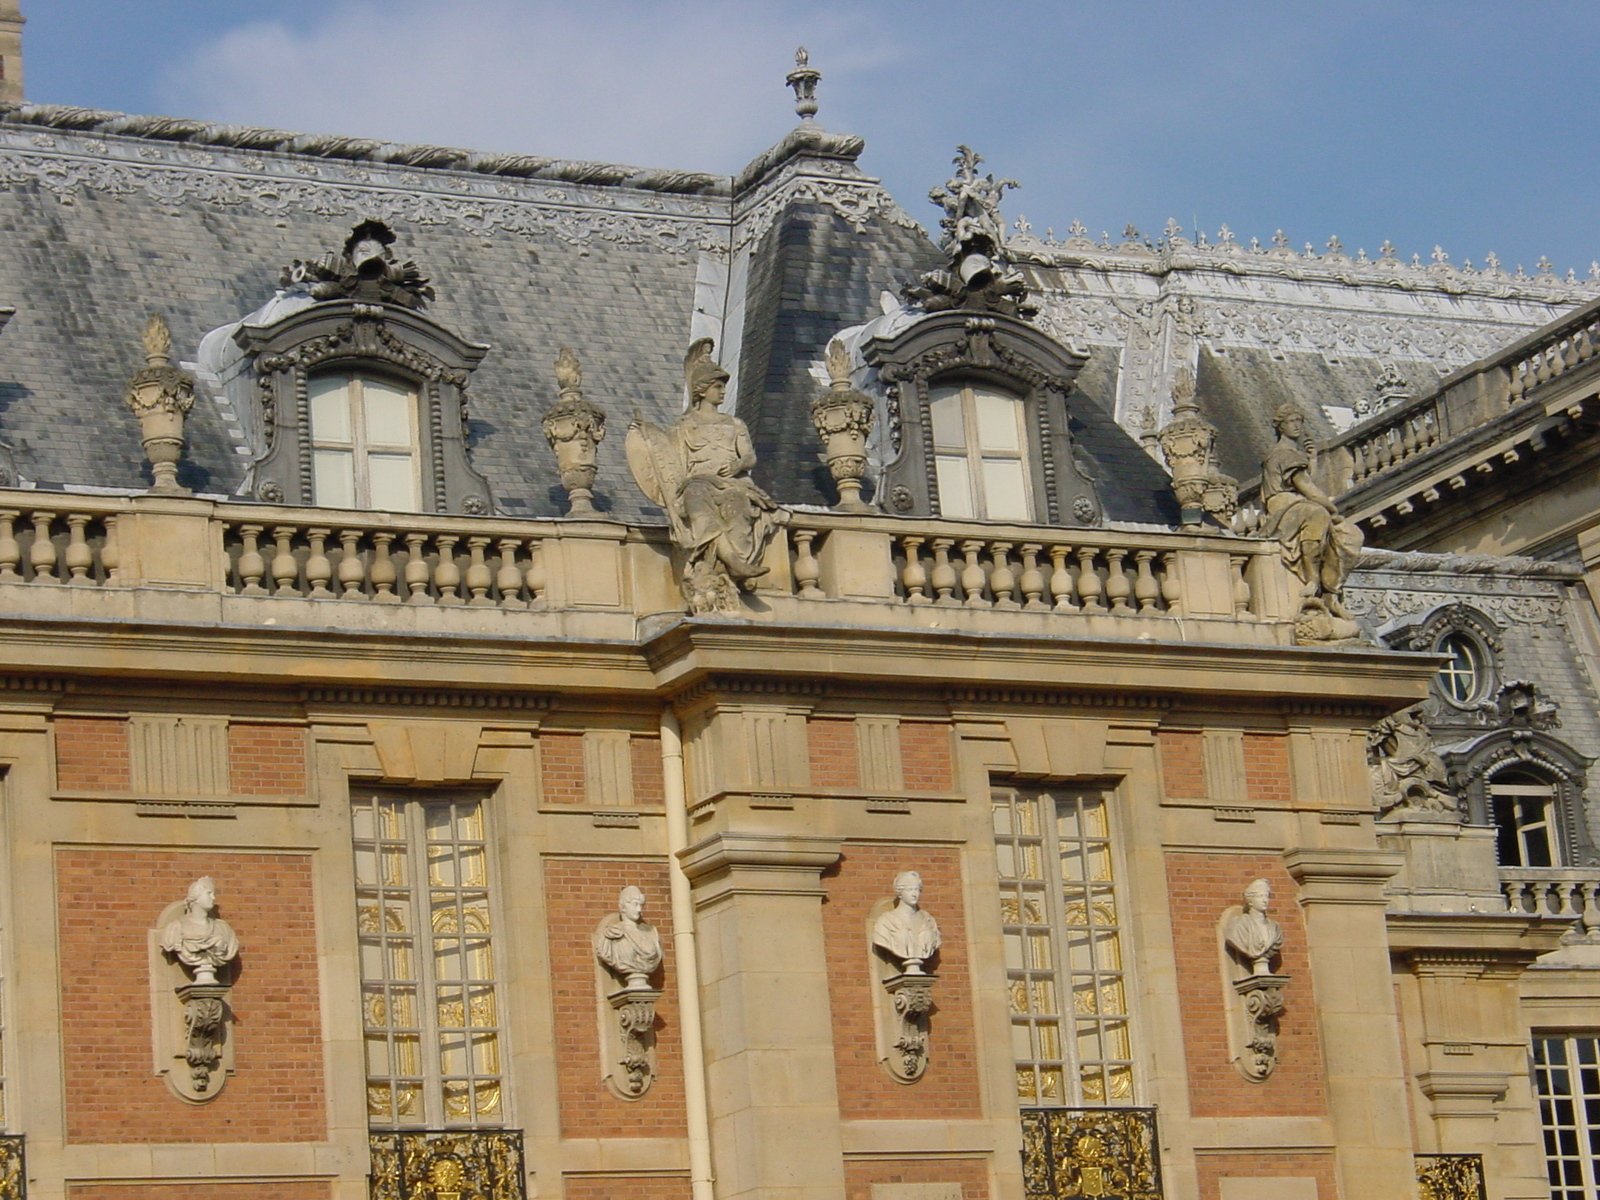 two large buildings with statues on their windows